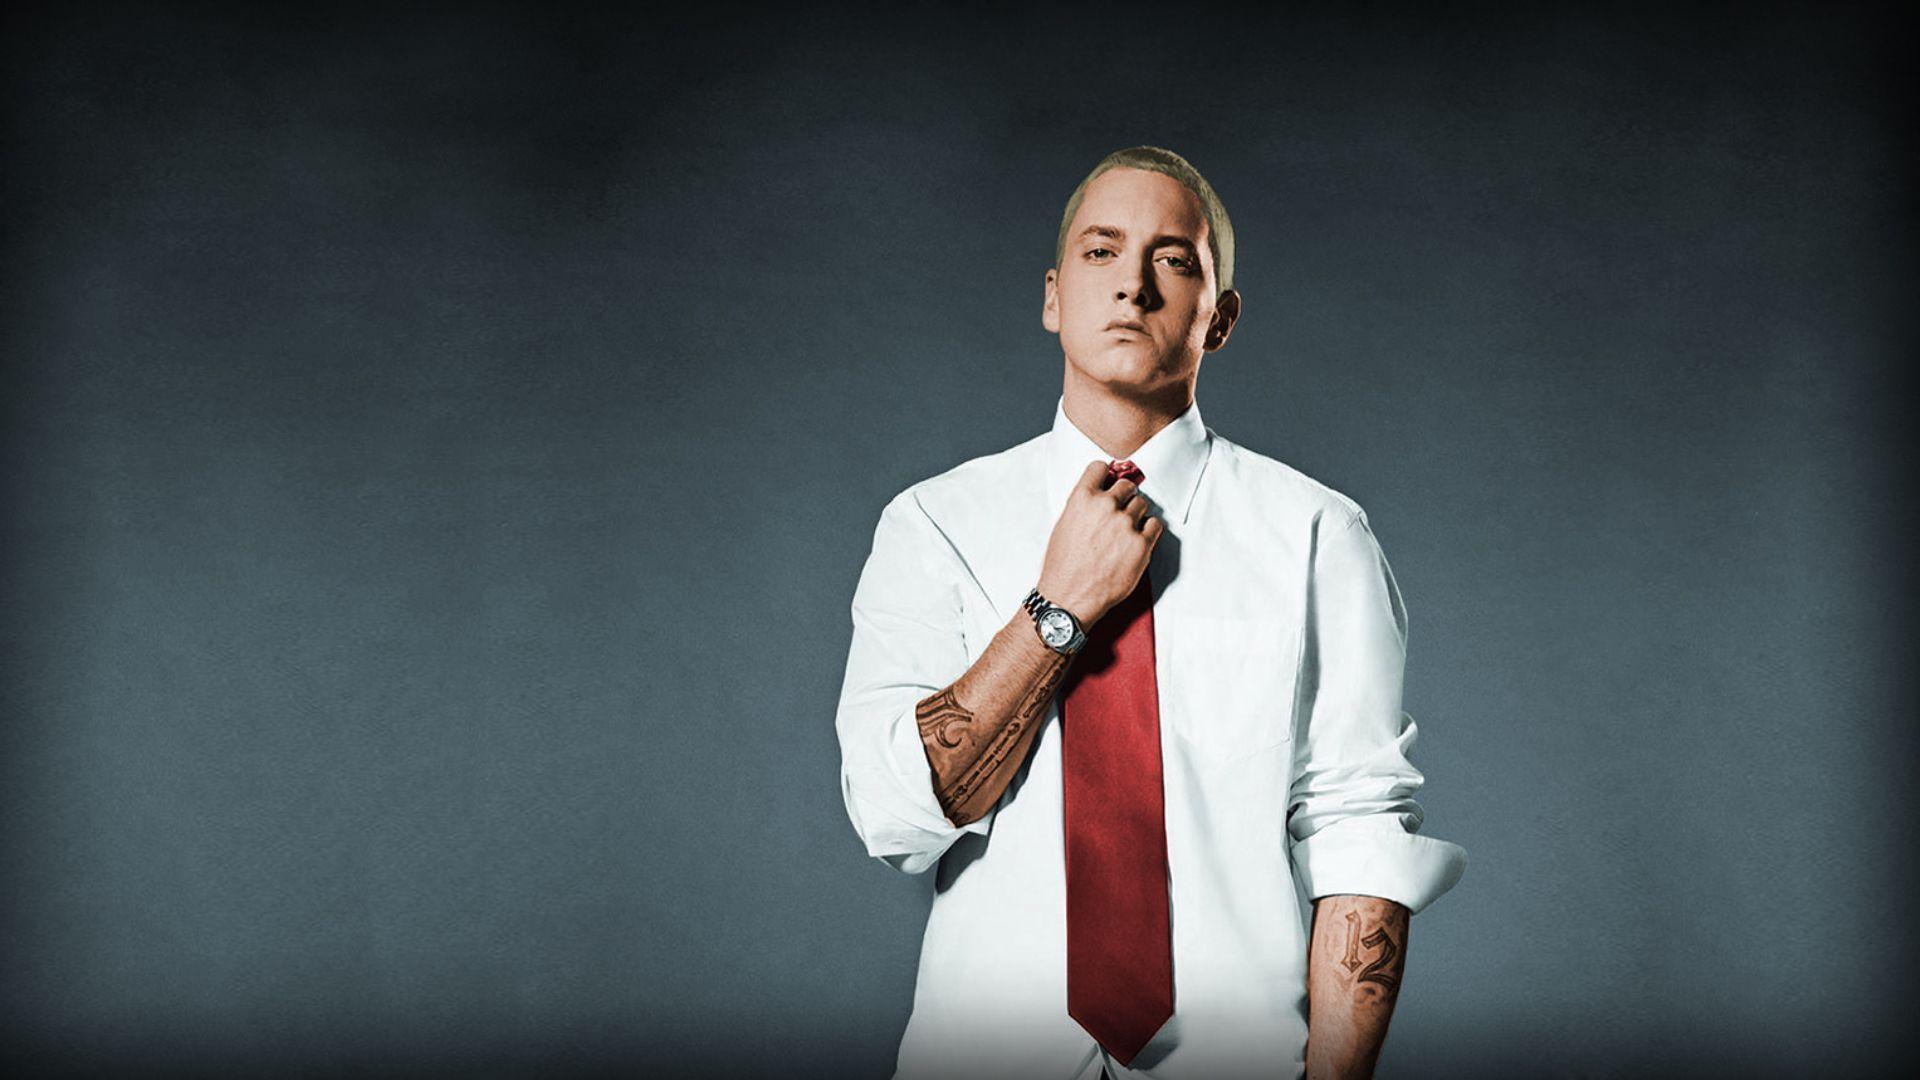 Things You May Not Know About Eminem